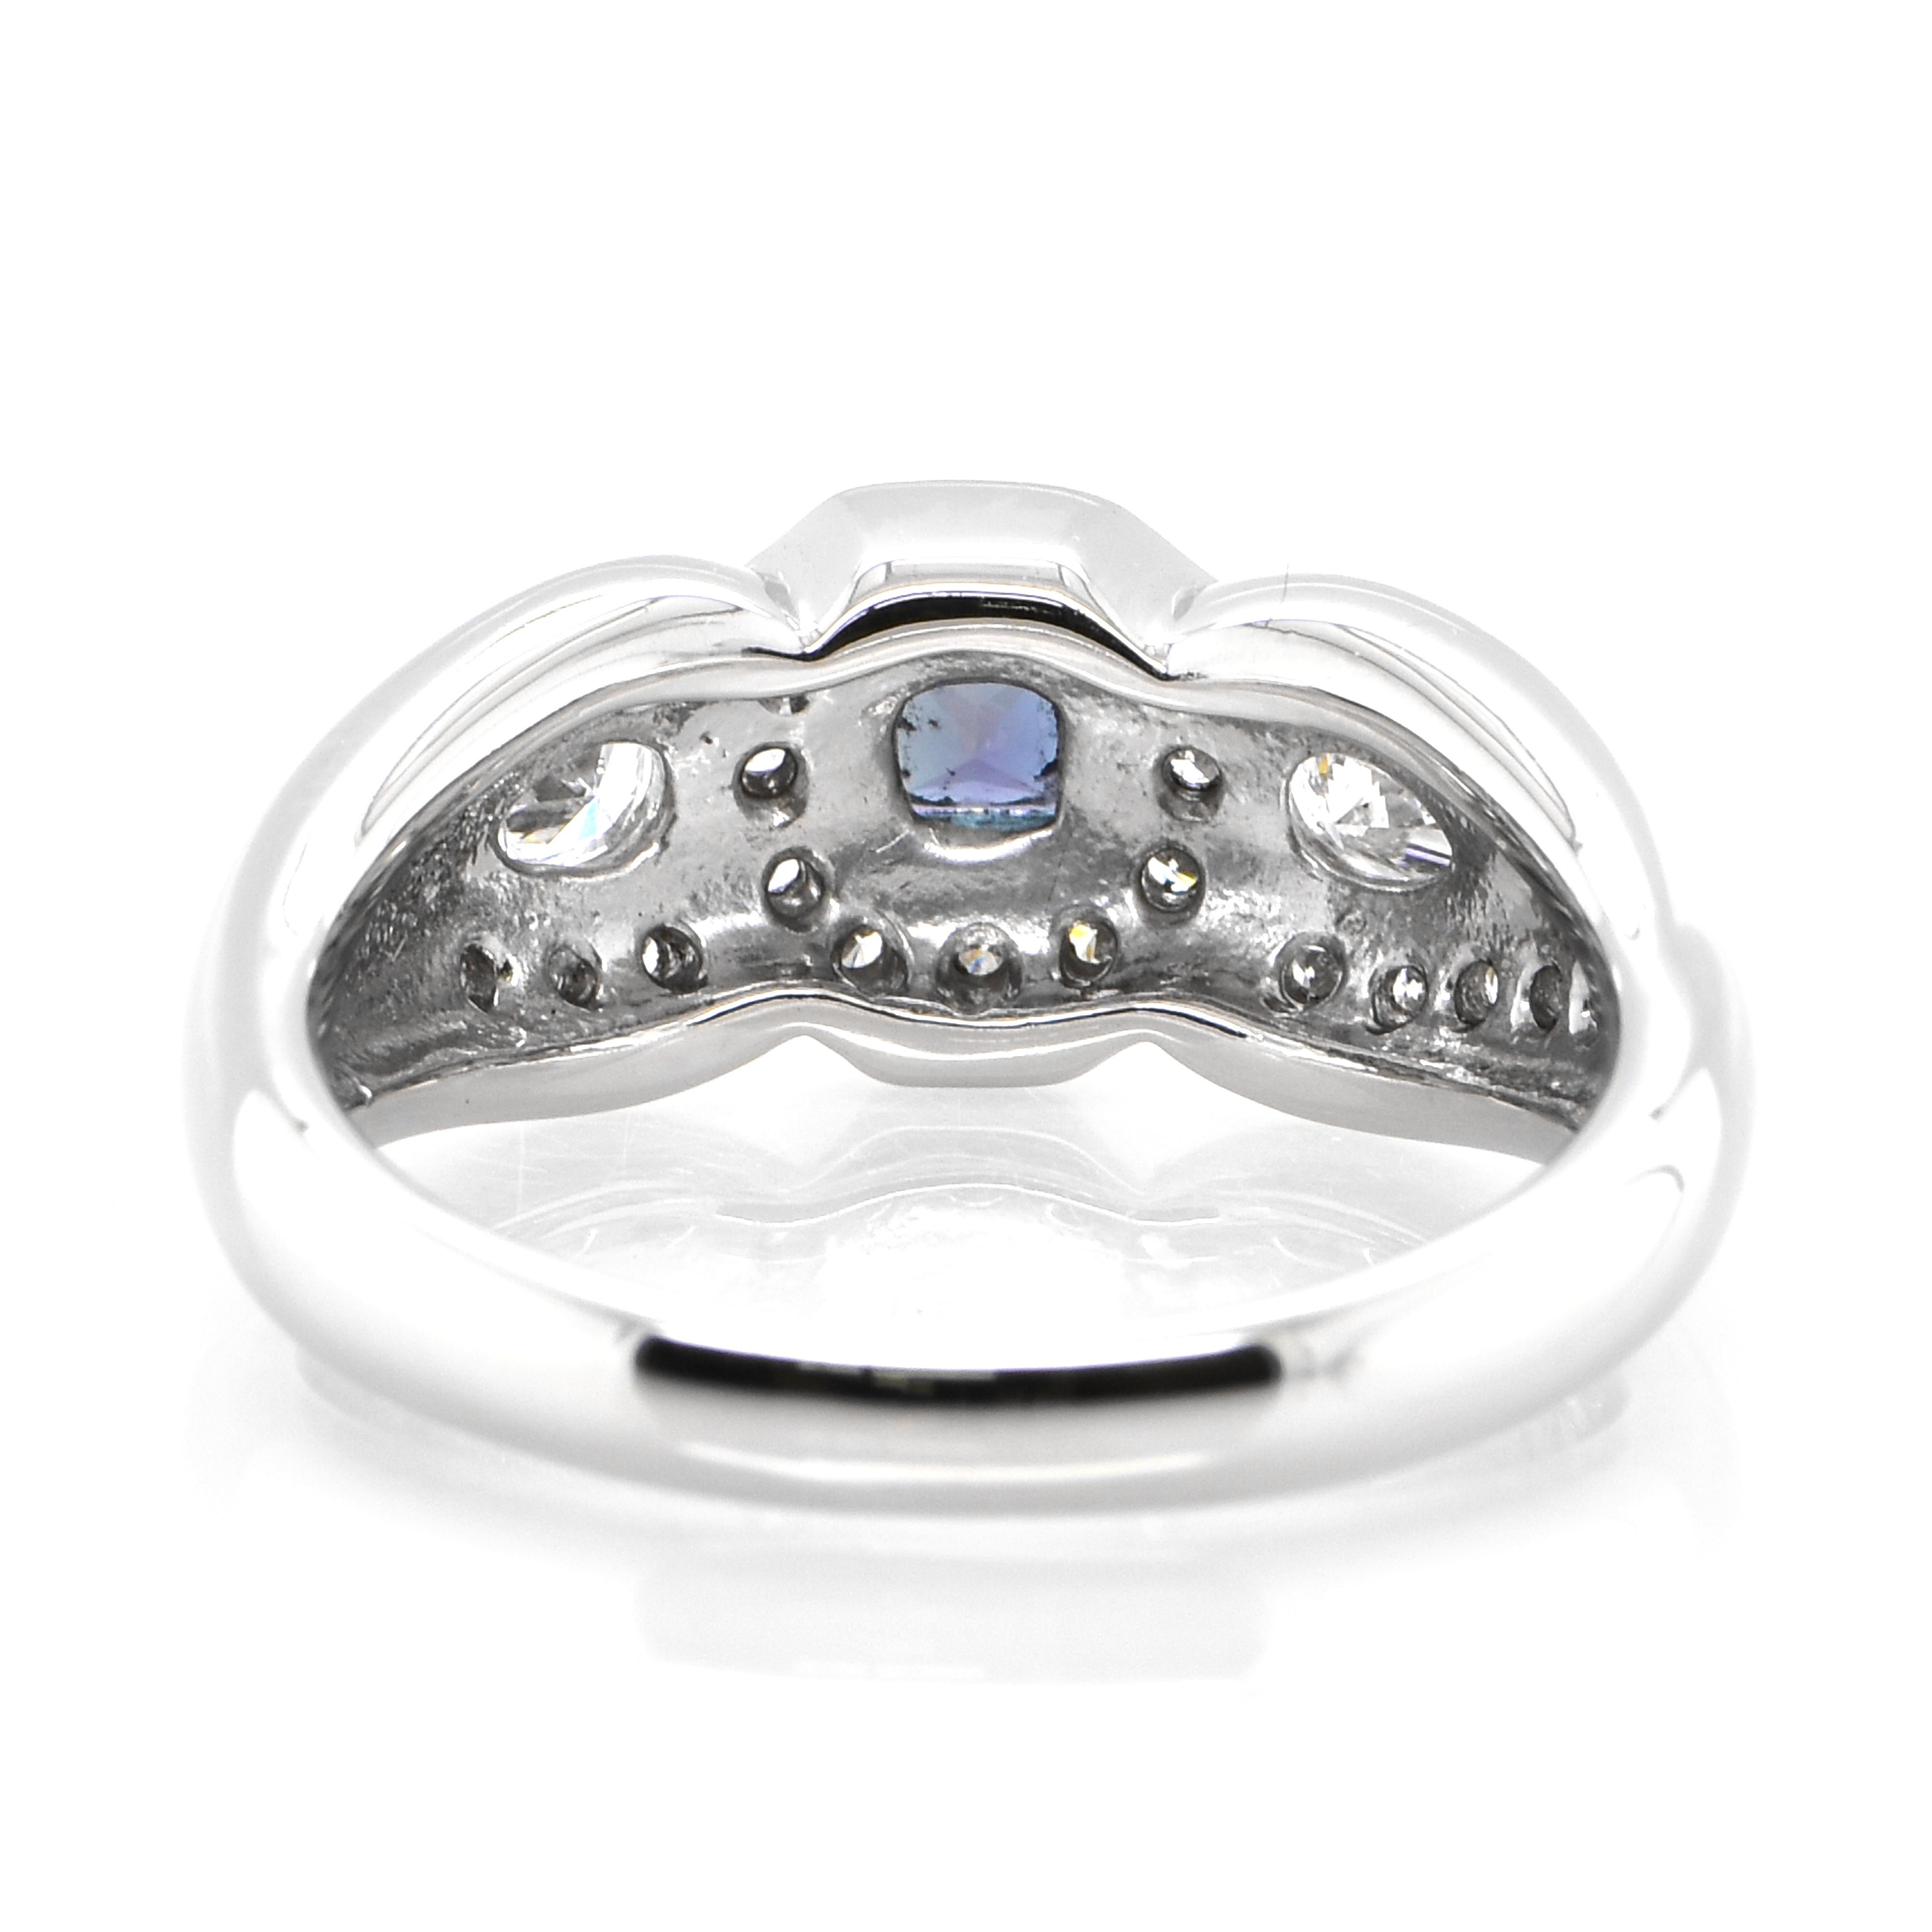 0.21 Carat Color-Changing Alexandrite and Diamond Ring set in Platinum For Sale 1